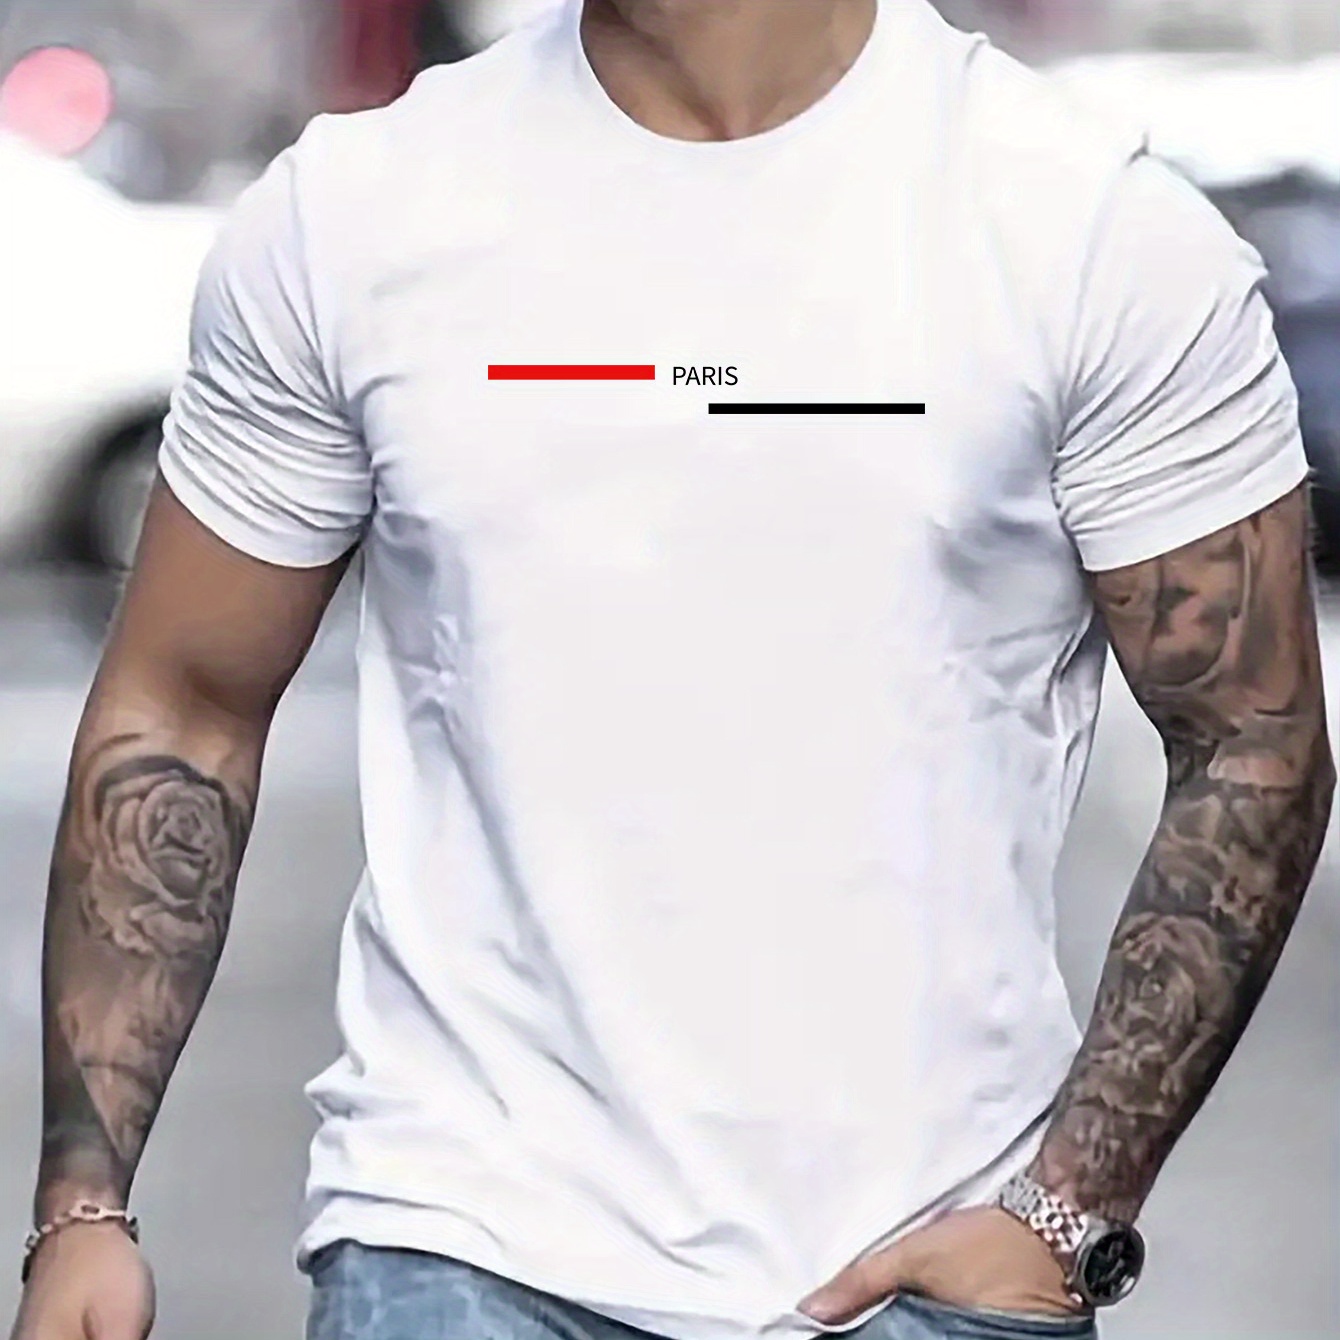 

Paris Print, Men's Round Crew Neck Short Sleeve, Simple Style Tee Fashion Regular Fit T-shirt, Casual Comfy Top For Spring Summer Holiday Leisure Vacation Men's Clothing As Gift